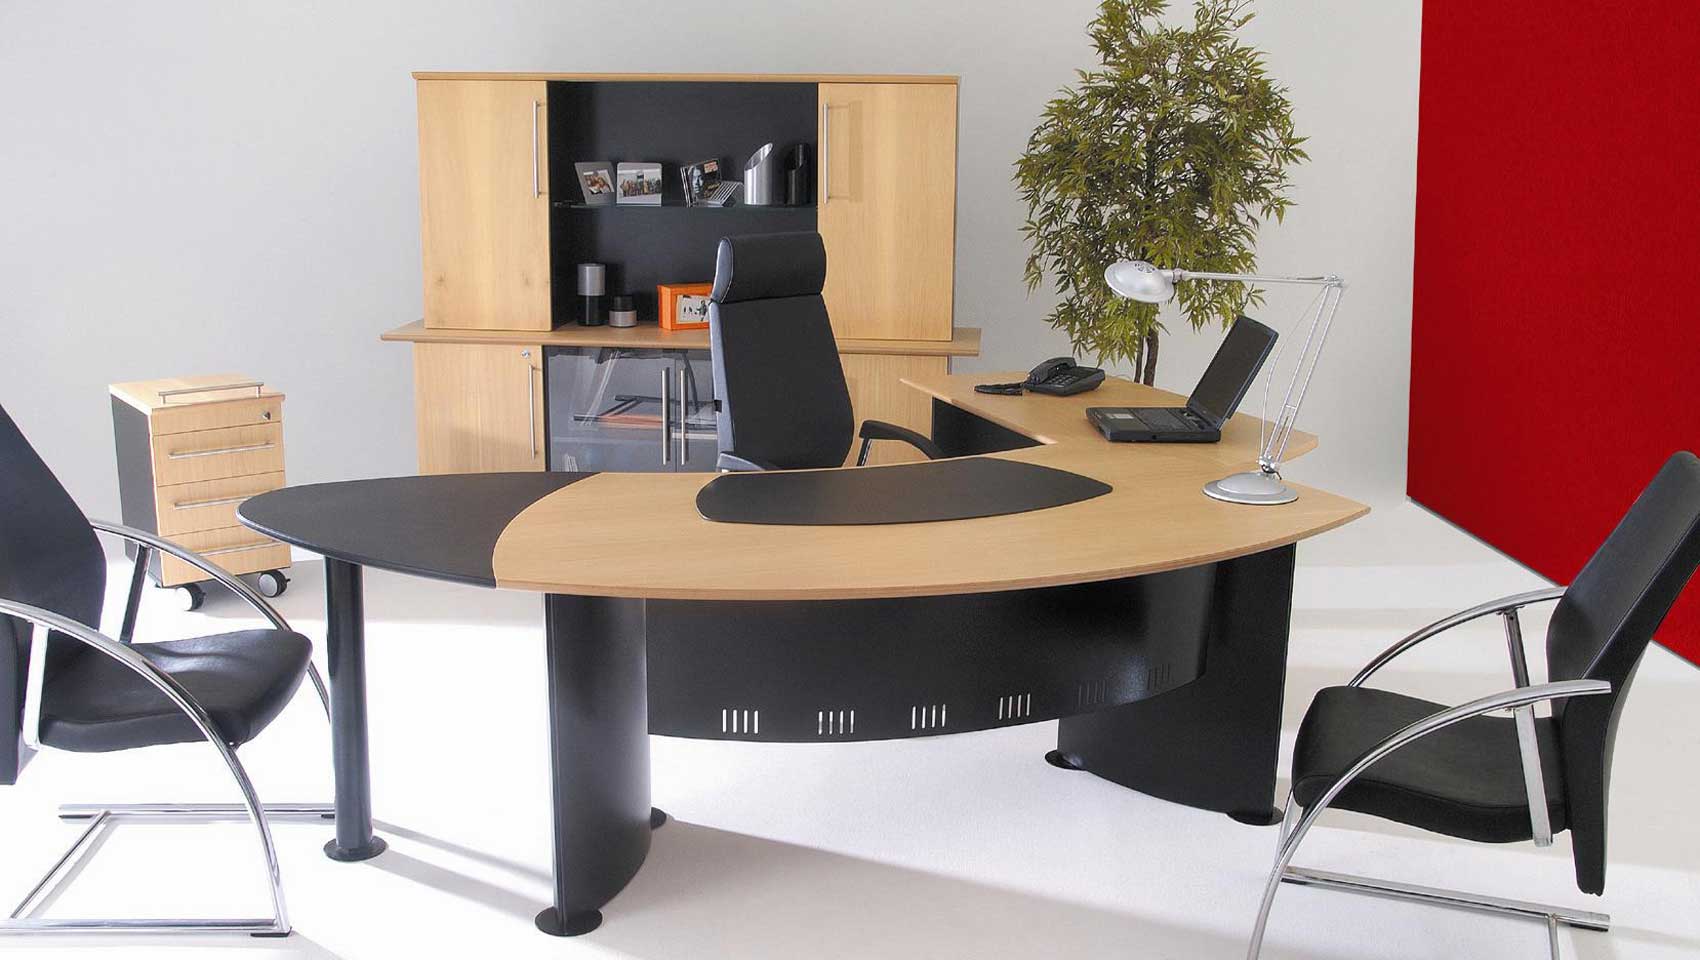 Curved Desk Home Miraculous Curved Desk In Modern Home Office Design Plus Vintage Loveseats And Shelving Office Modern Home Office To Play With Furniture And Lighting Fixtures